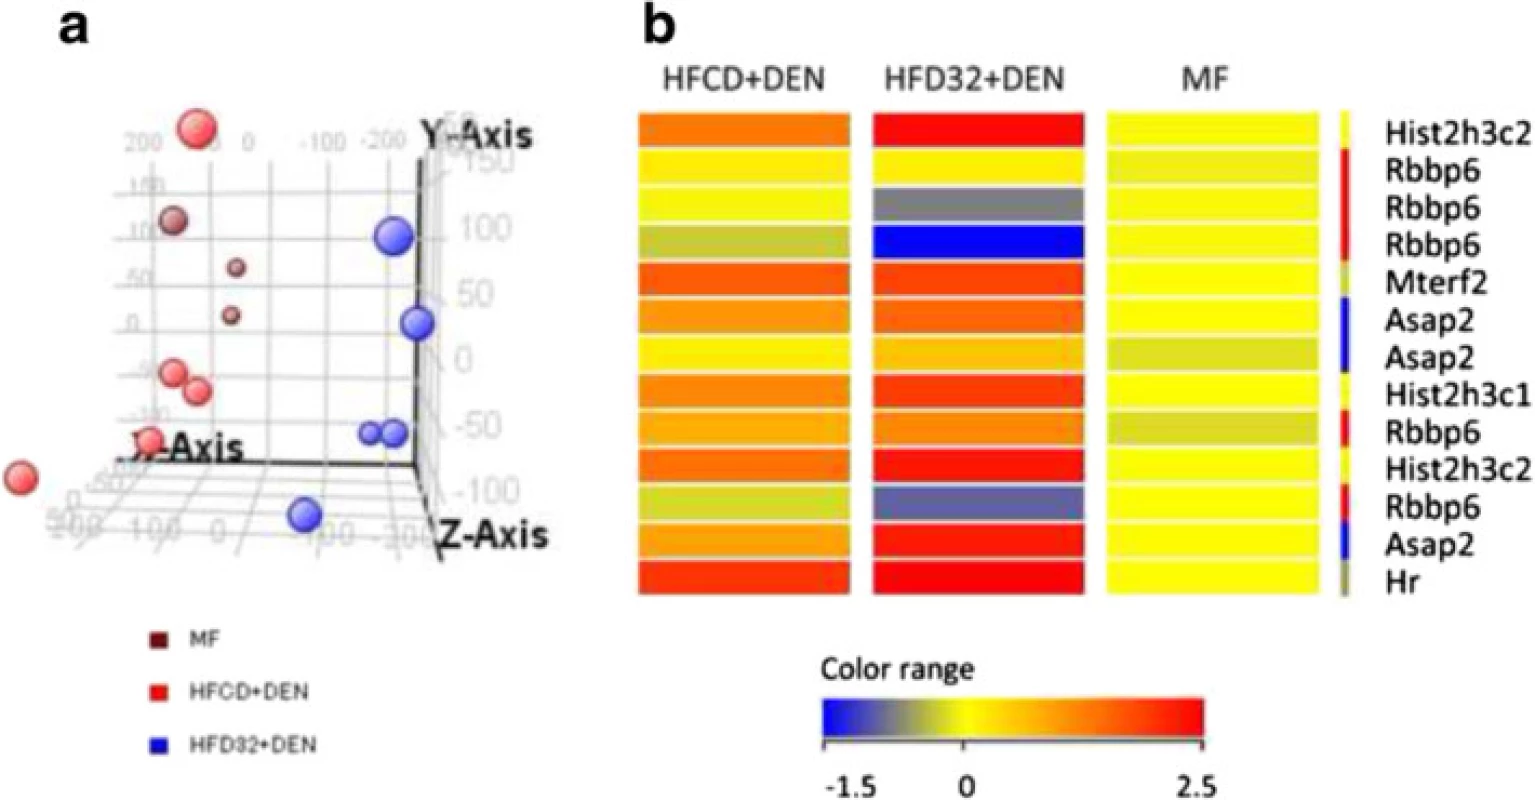 Expression of MF, HFCD + DEN, and HFD32. a Principal component analysis of MF (brawn), HFCD + DEN (red), and HFD32 + DEN (blue). MF group contained three mice. HFCD + DEN and HFD32 + DEN group contained five mice. b Heat map of HCC-related genes common to both HFCD + DEN and HFD32 + DEN. DEN, diethylnitrosamine; standard diet (MF); HFCD, high-fat, choline-deficient diet; HFD32, high-fat diet